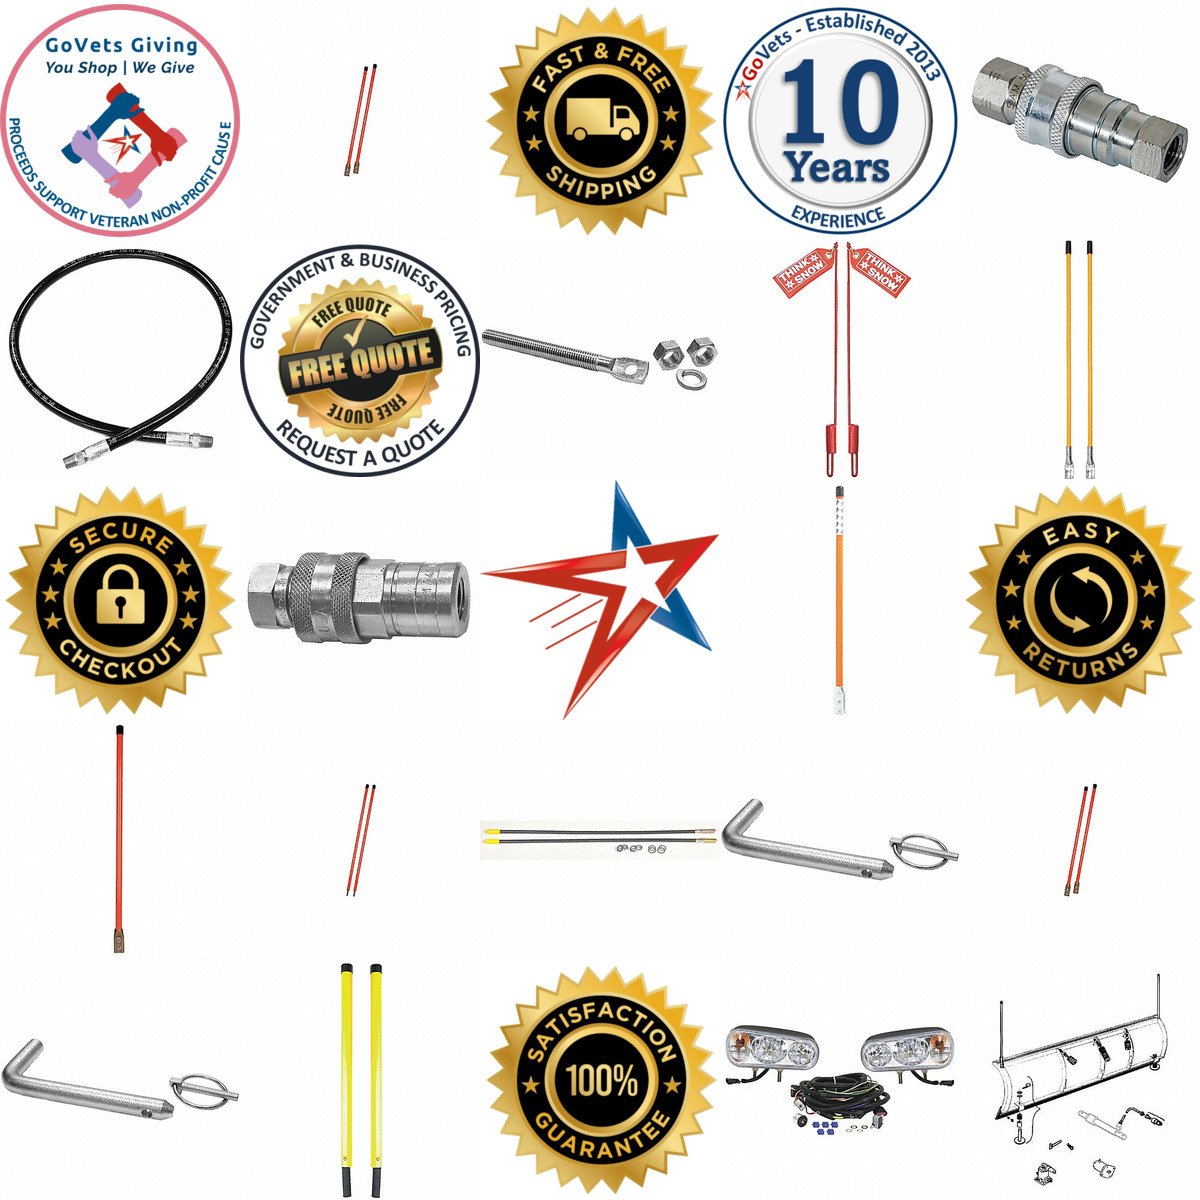 A selection of Snow Plow Accessories and Replacement Parts products on GoVets